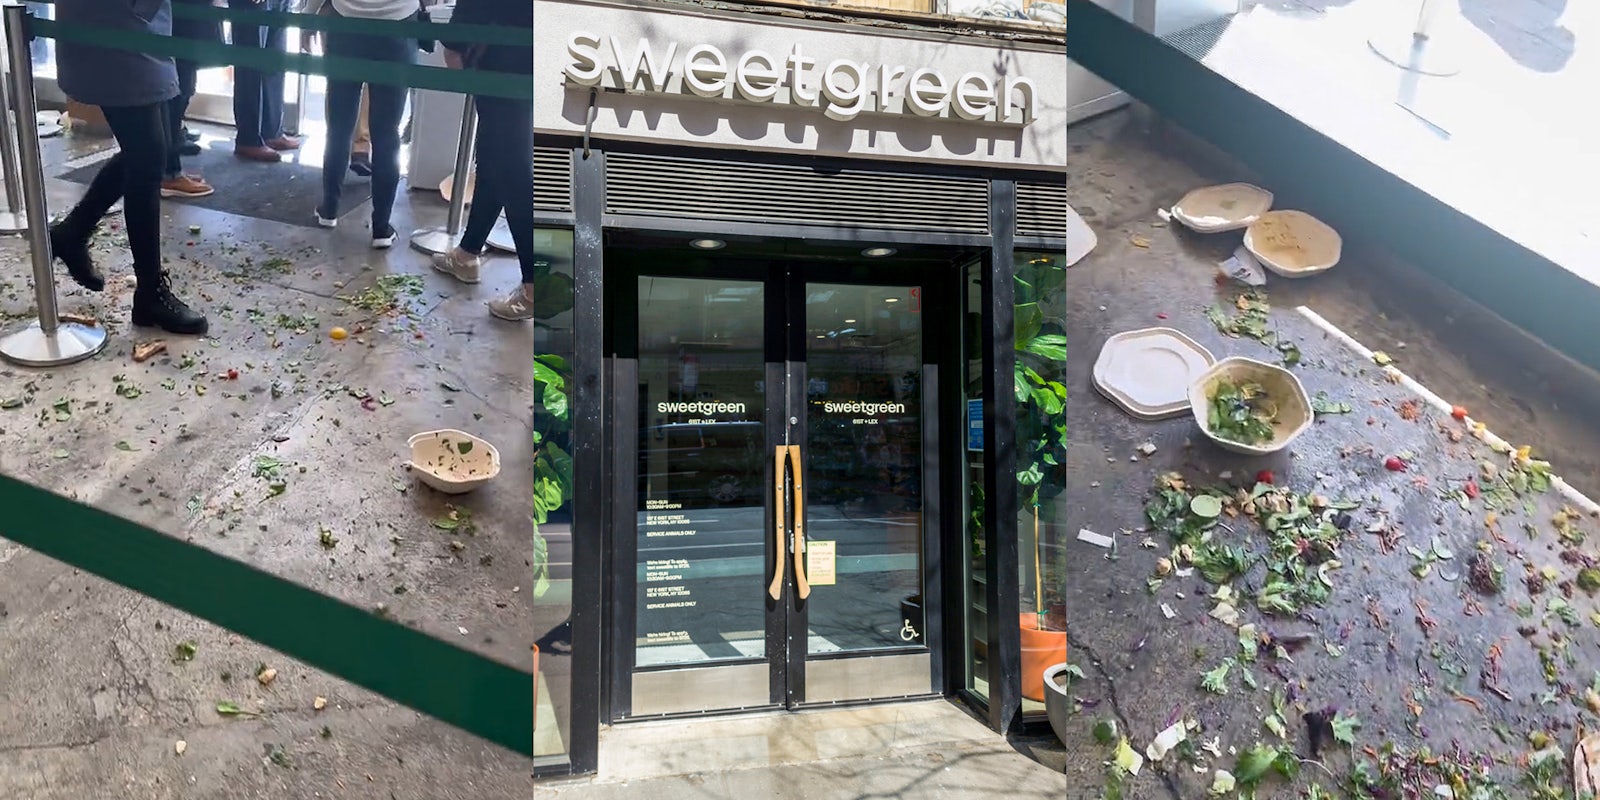 Sweetgreen interior with salad all over floor (l) Sweetgreen entrance with sign (c) Sweetgreen interior with salad all over floor (r)